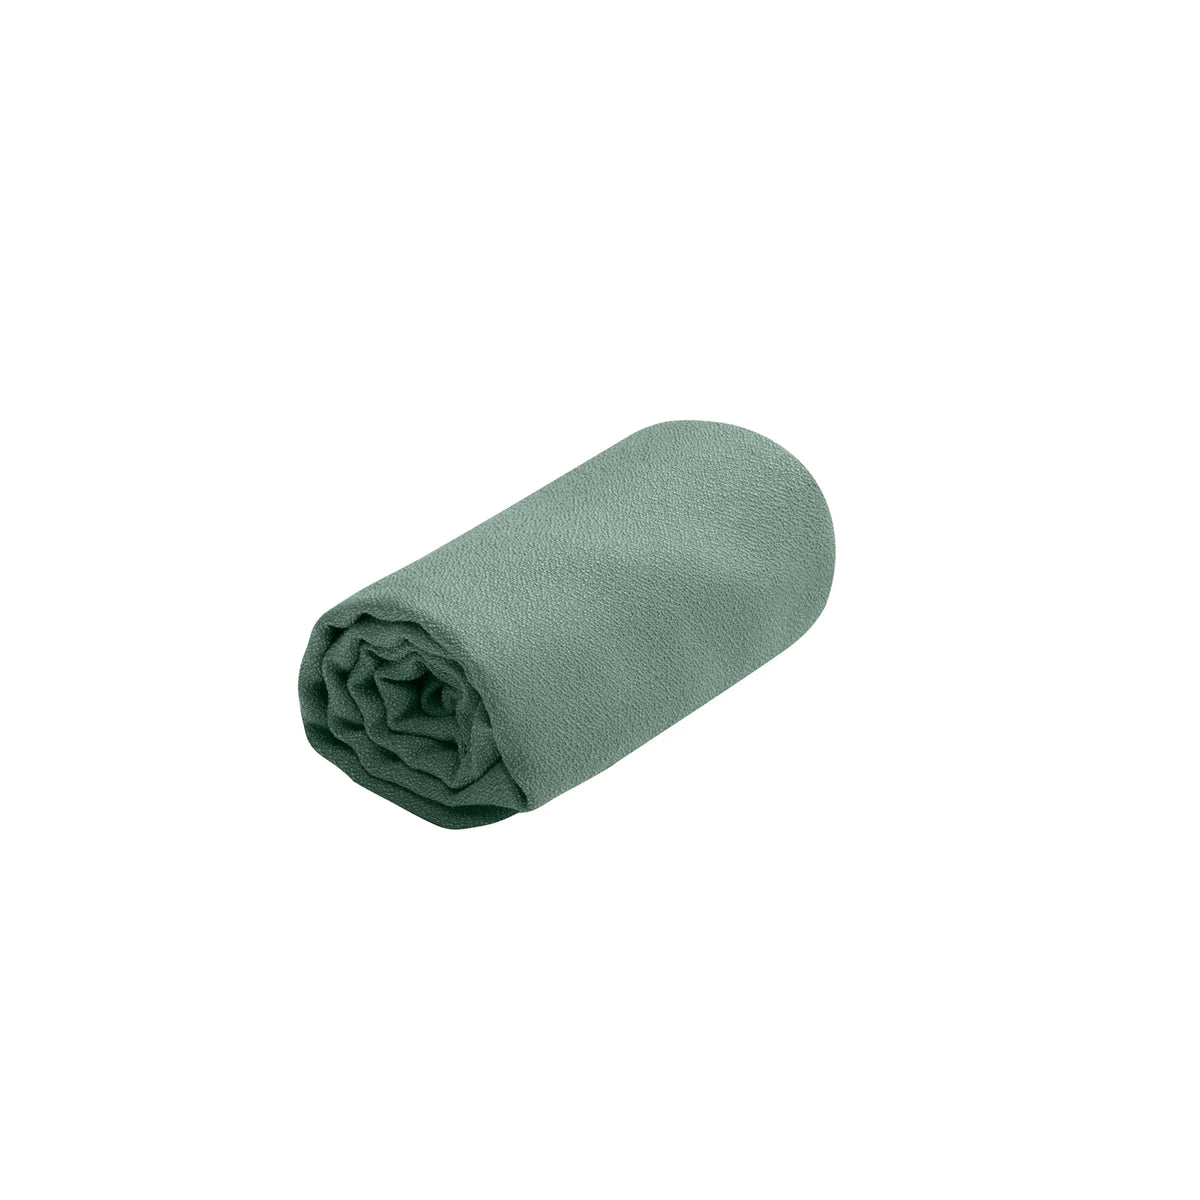 Sea to Summit - Airlite Towel Small - Sage Green-1